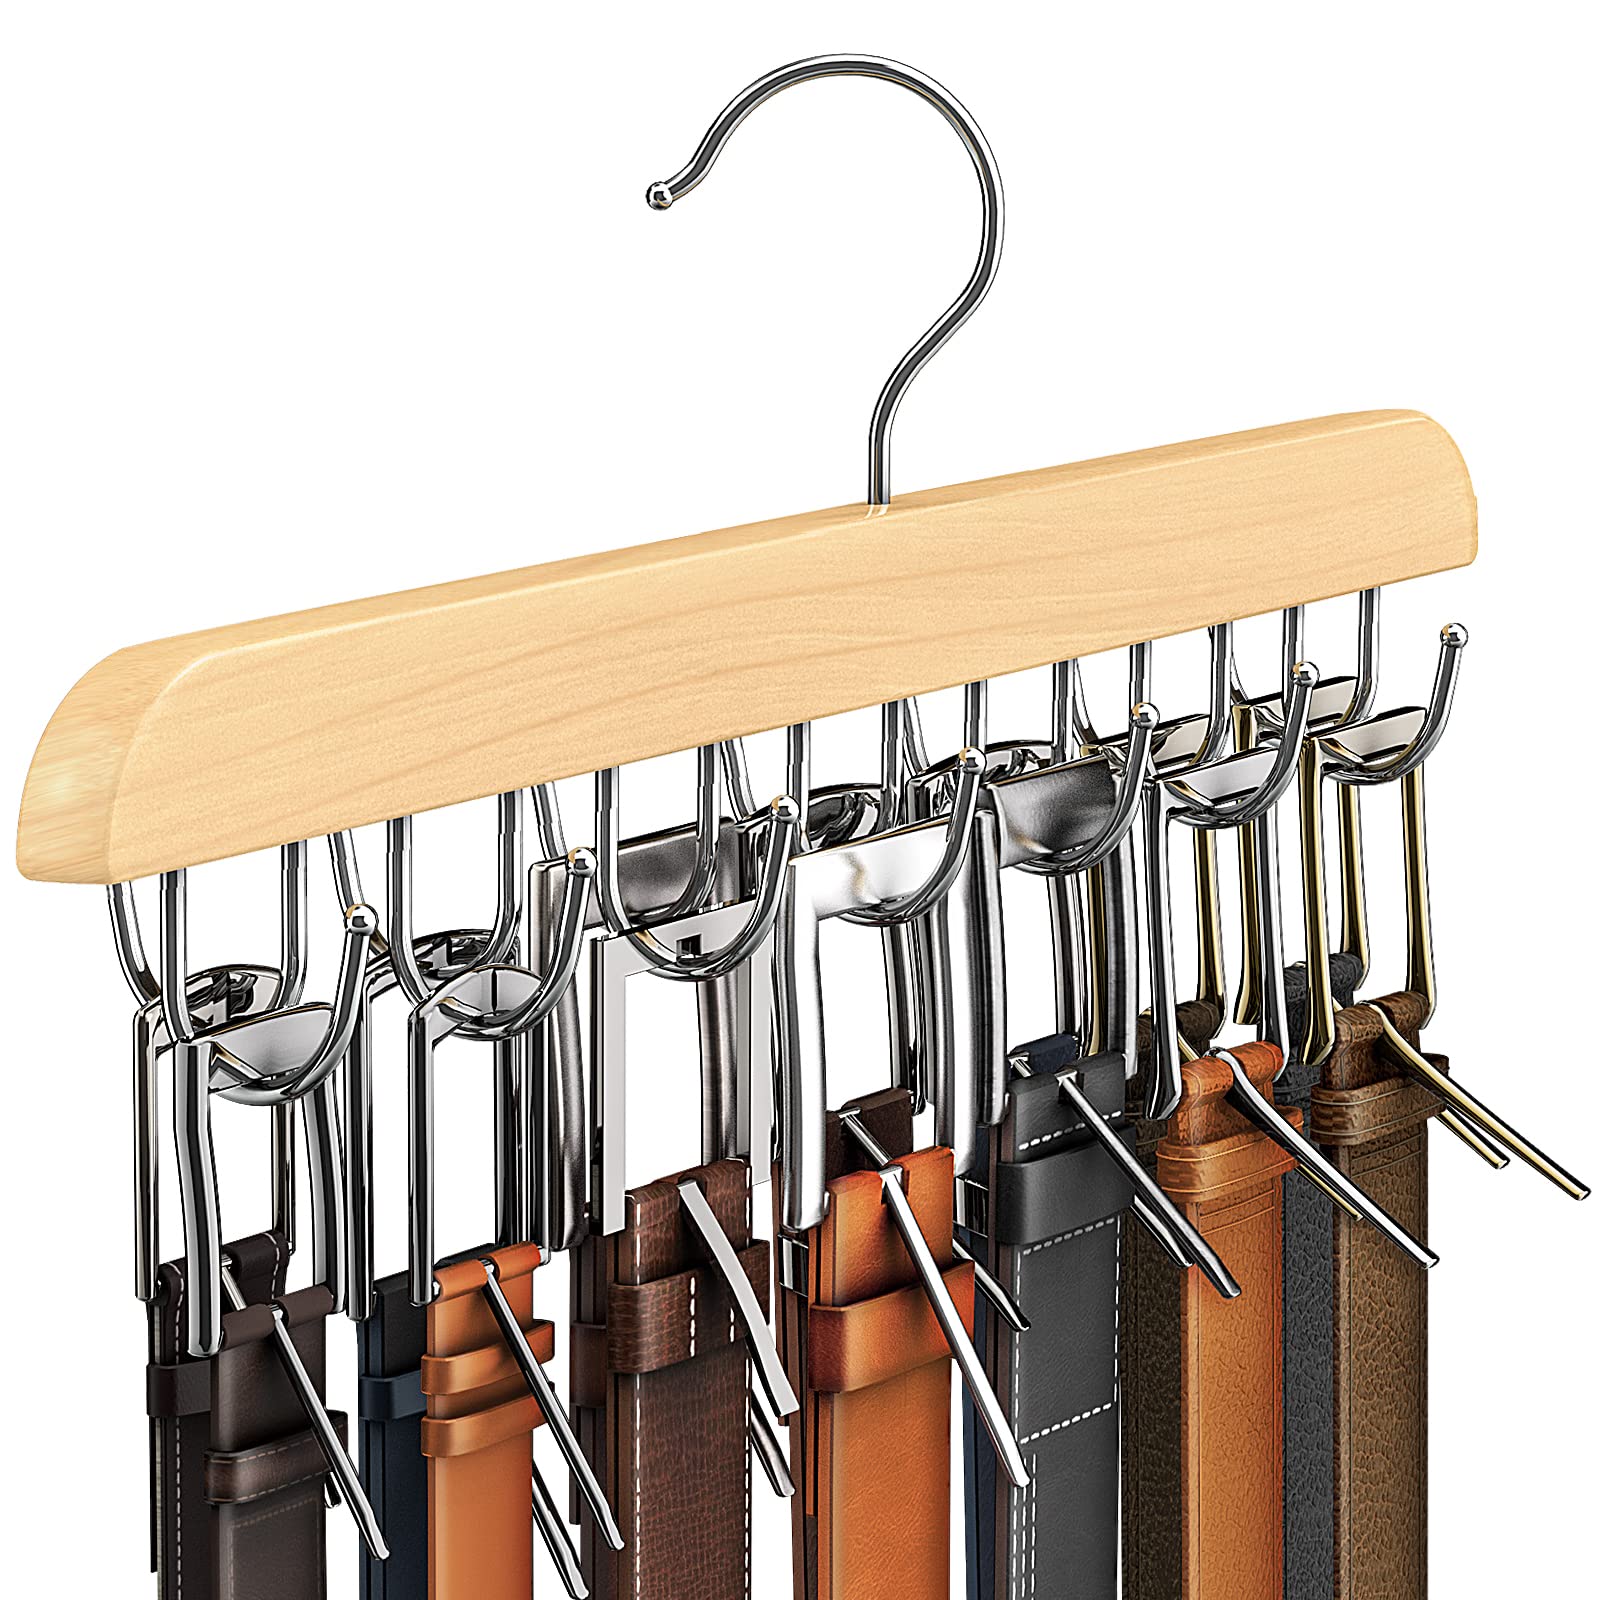 

1pc 14-hook Wooden Underwear Hanger, Durable Clothes Drying Rack For Ties, Camisoles, Scarves, Belts, Household Storage Organizer For Bathroom, Bedroom, Closet, Wardrobe, Home, Dorm